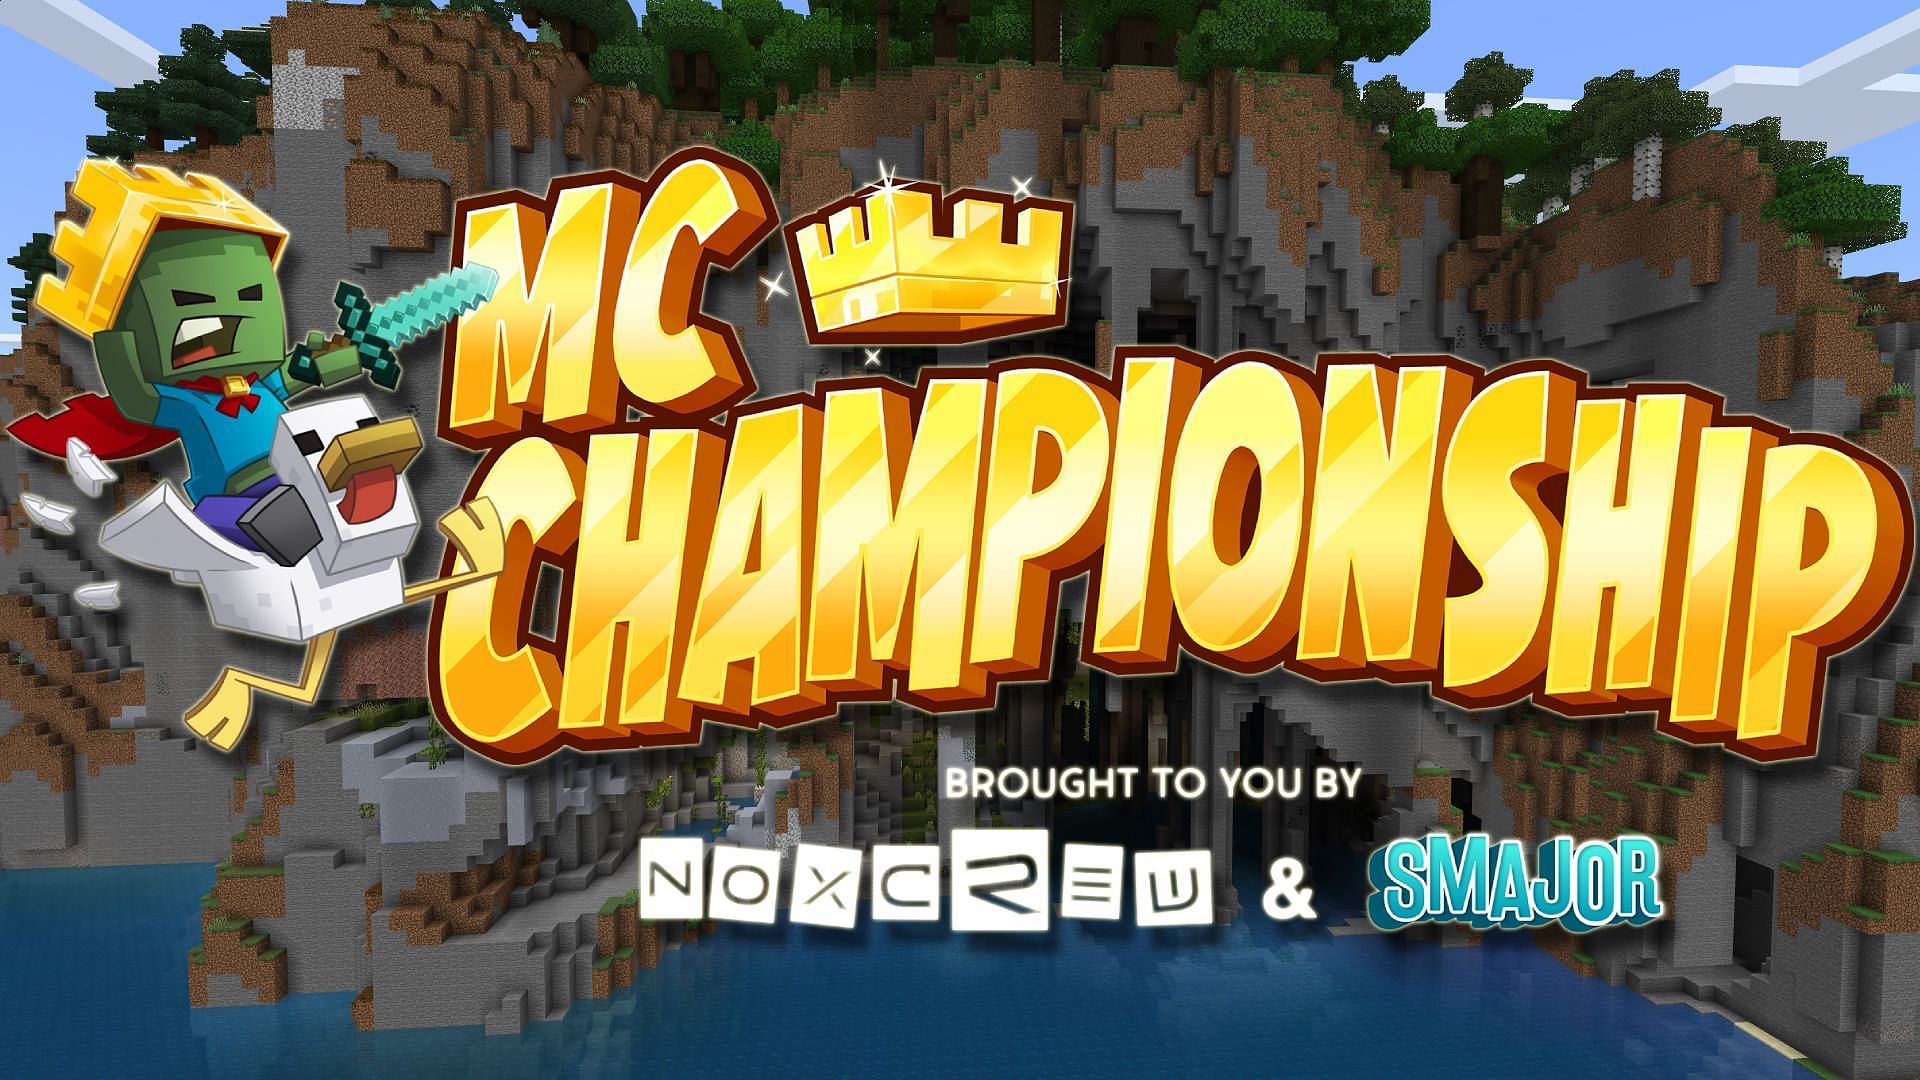 How to tune in to Minecraft Championship 25